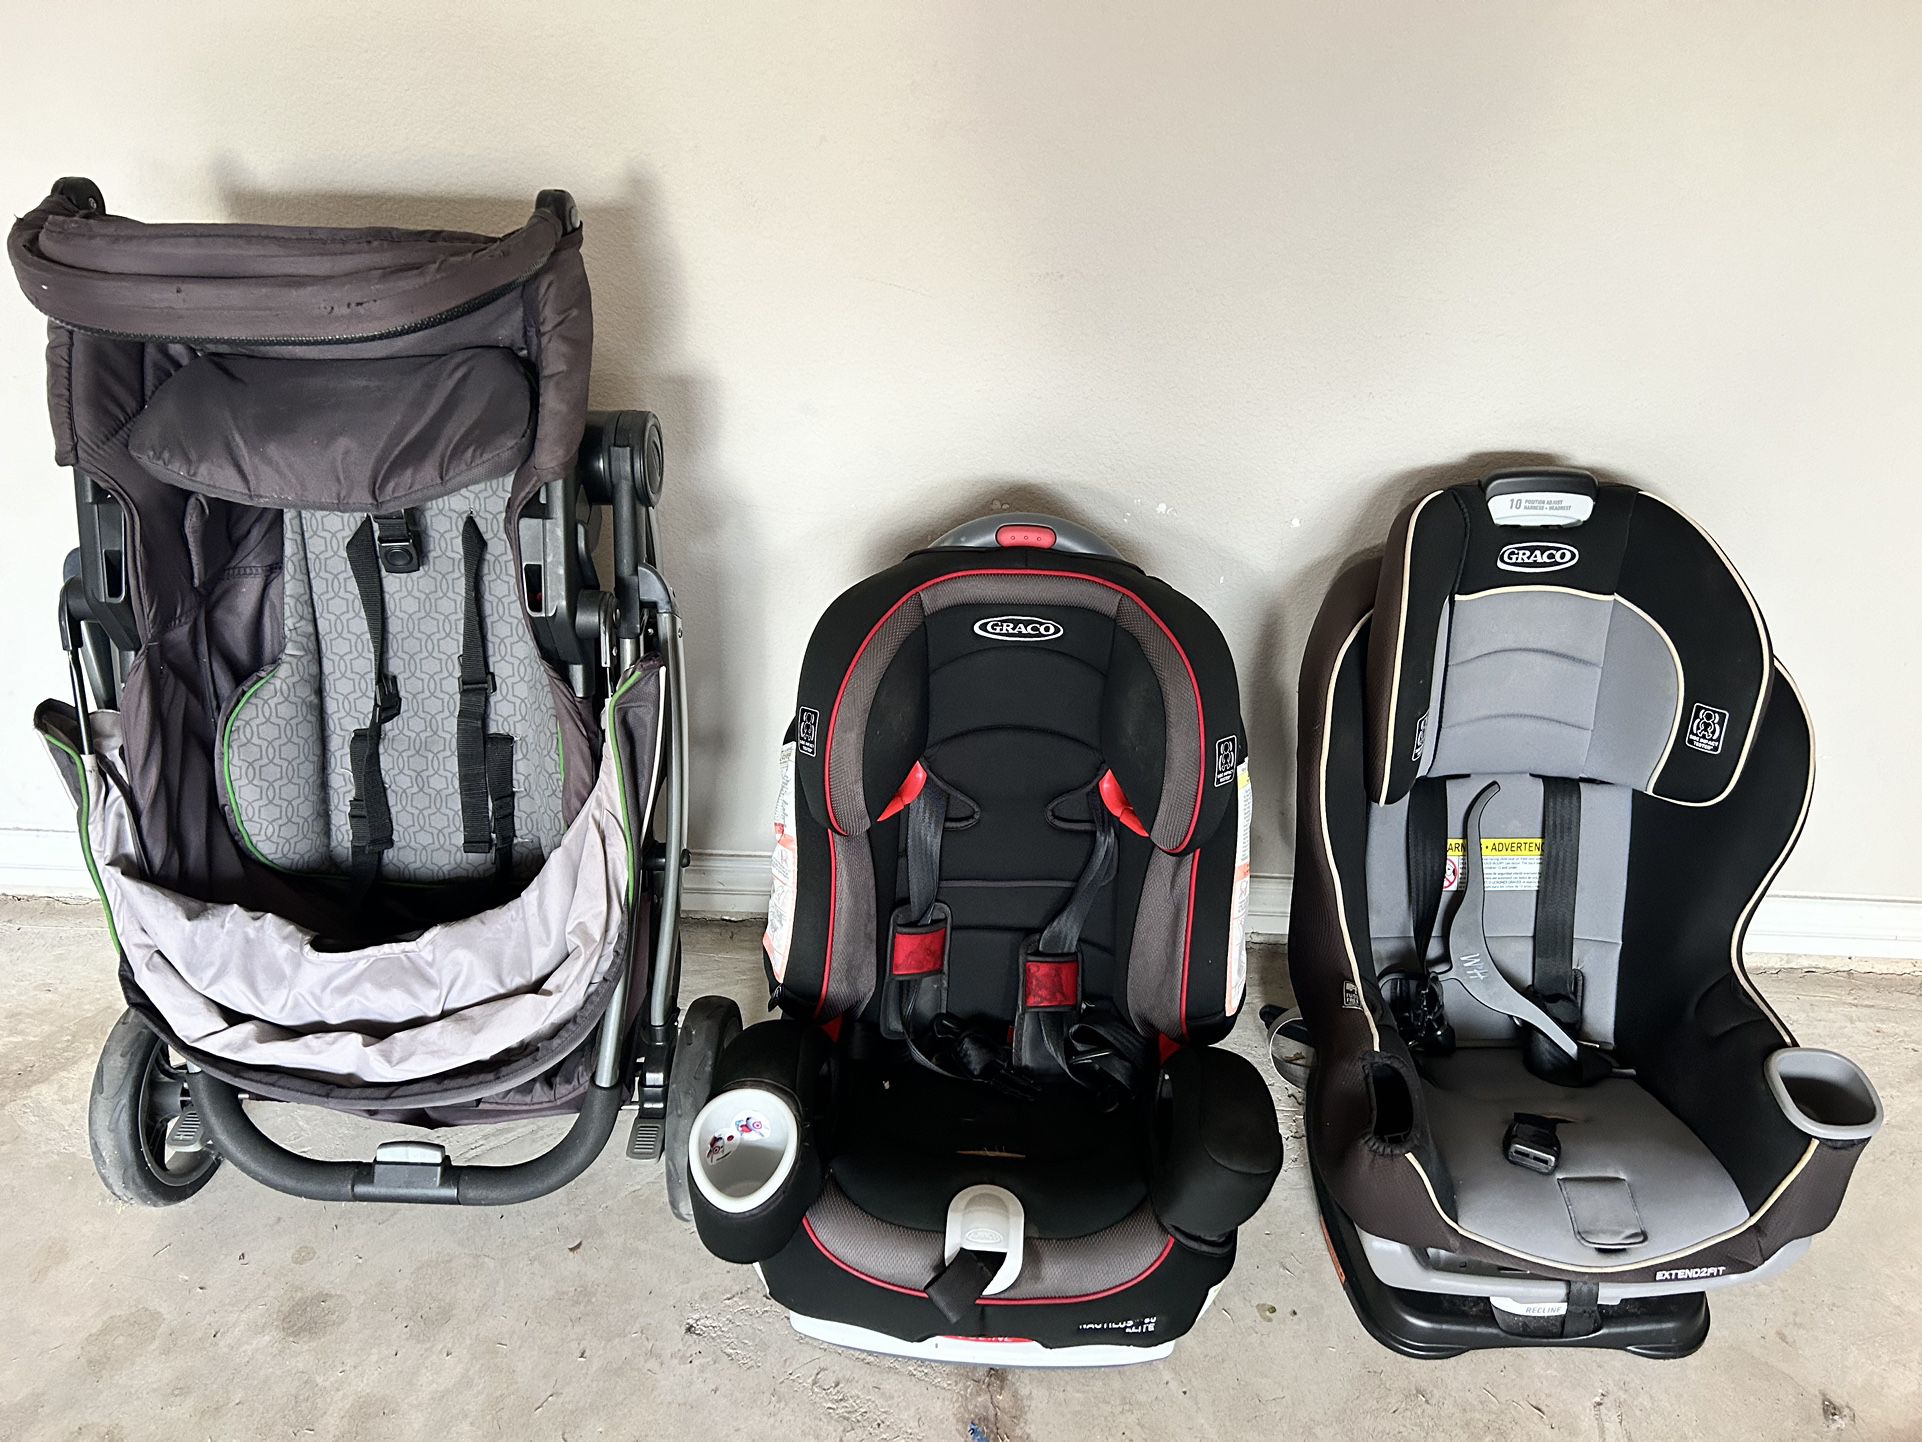 Graco All Age car Seats And stroller